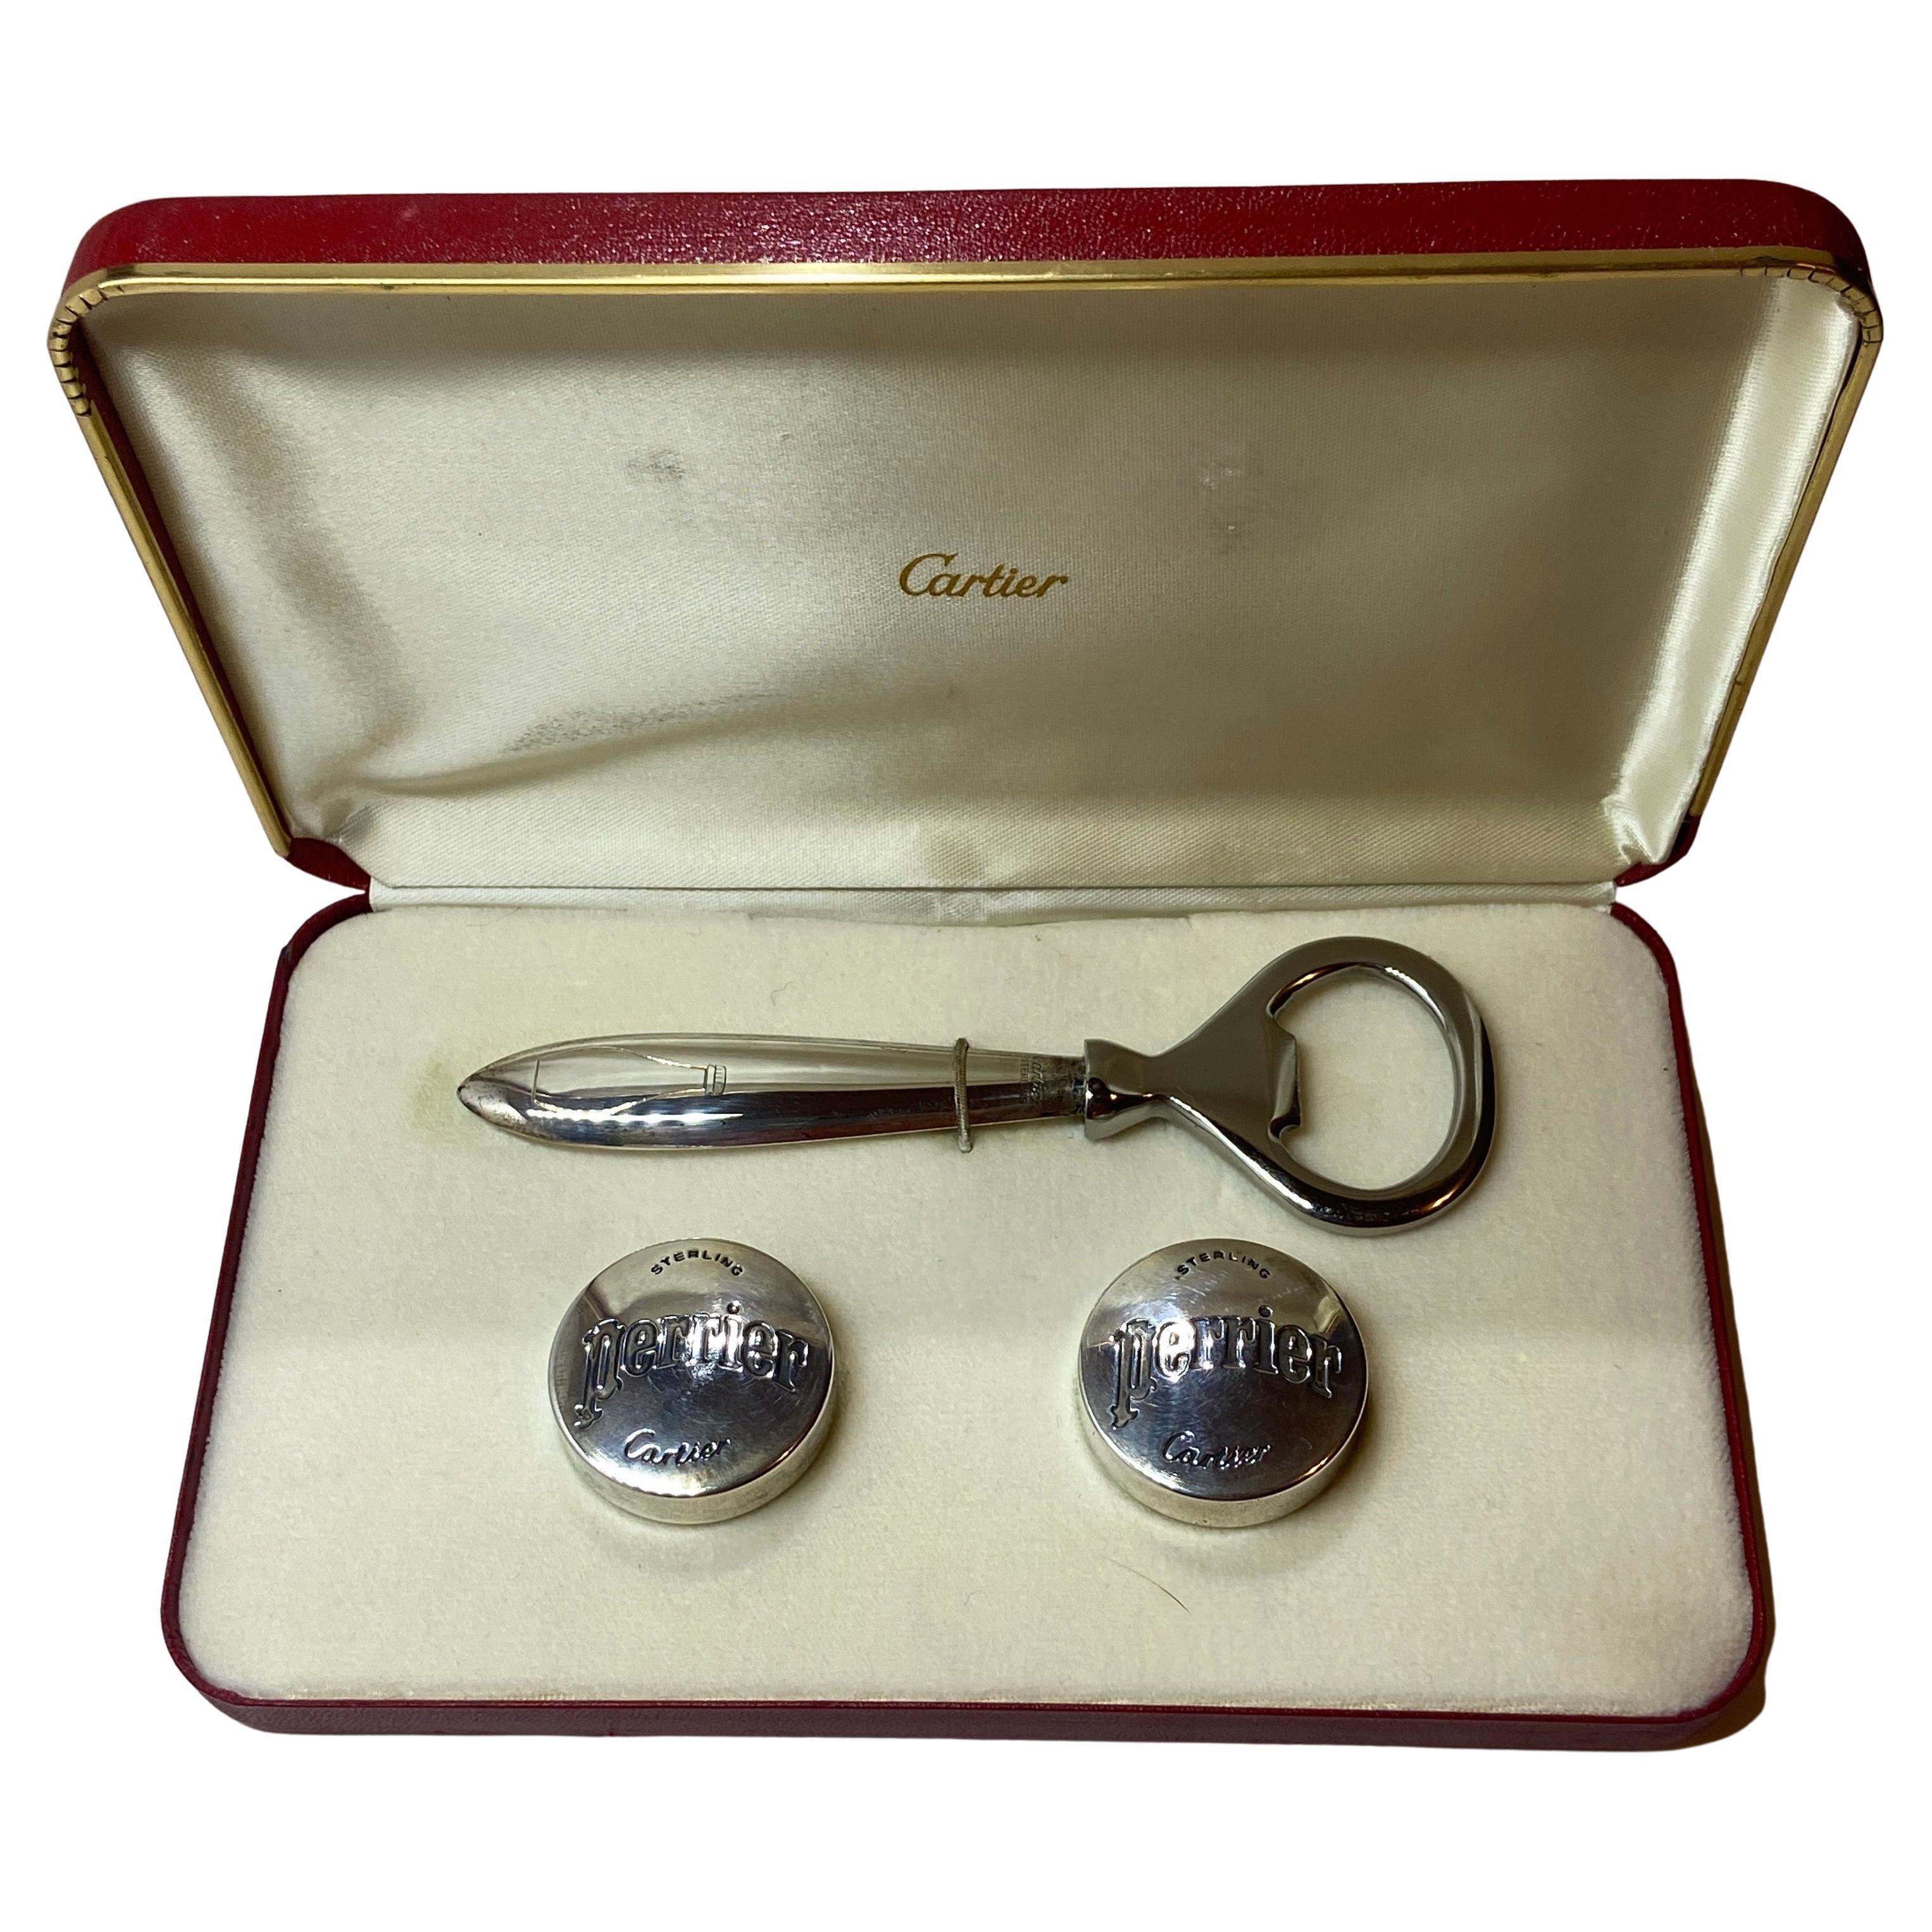 Cartier Boxed Sterling Silver Set of Perrier Bottle Caps and Bottle Opener